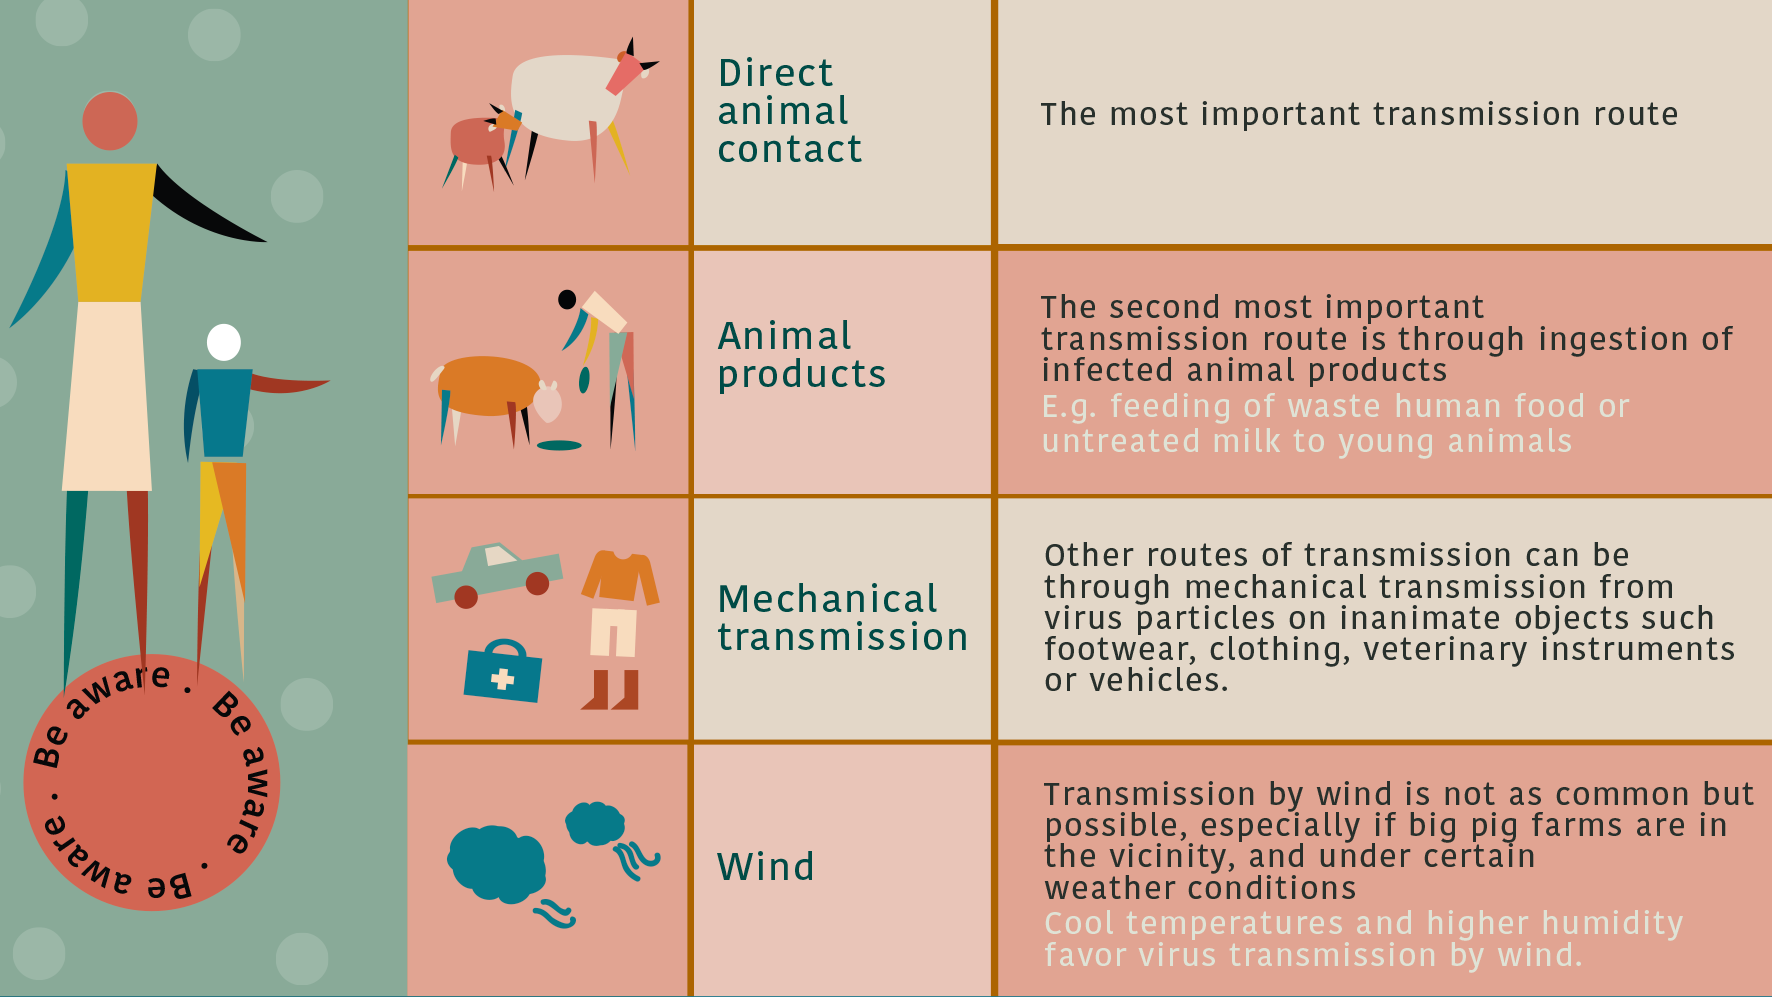 X 上的EuFMD/FAST：「The most common and effective transmission route for #FMD  is through direct animal contact. 🐮🦌🐑🐐 Lear more about how the routes  of transmission of #FootandMouth Disease➡️ https://t.co/B2ZH33fAOD  #AnimalHealth #AnimalWelfare ...